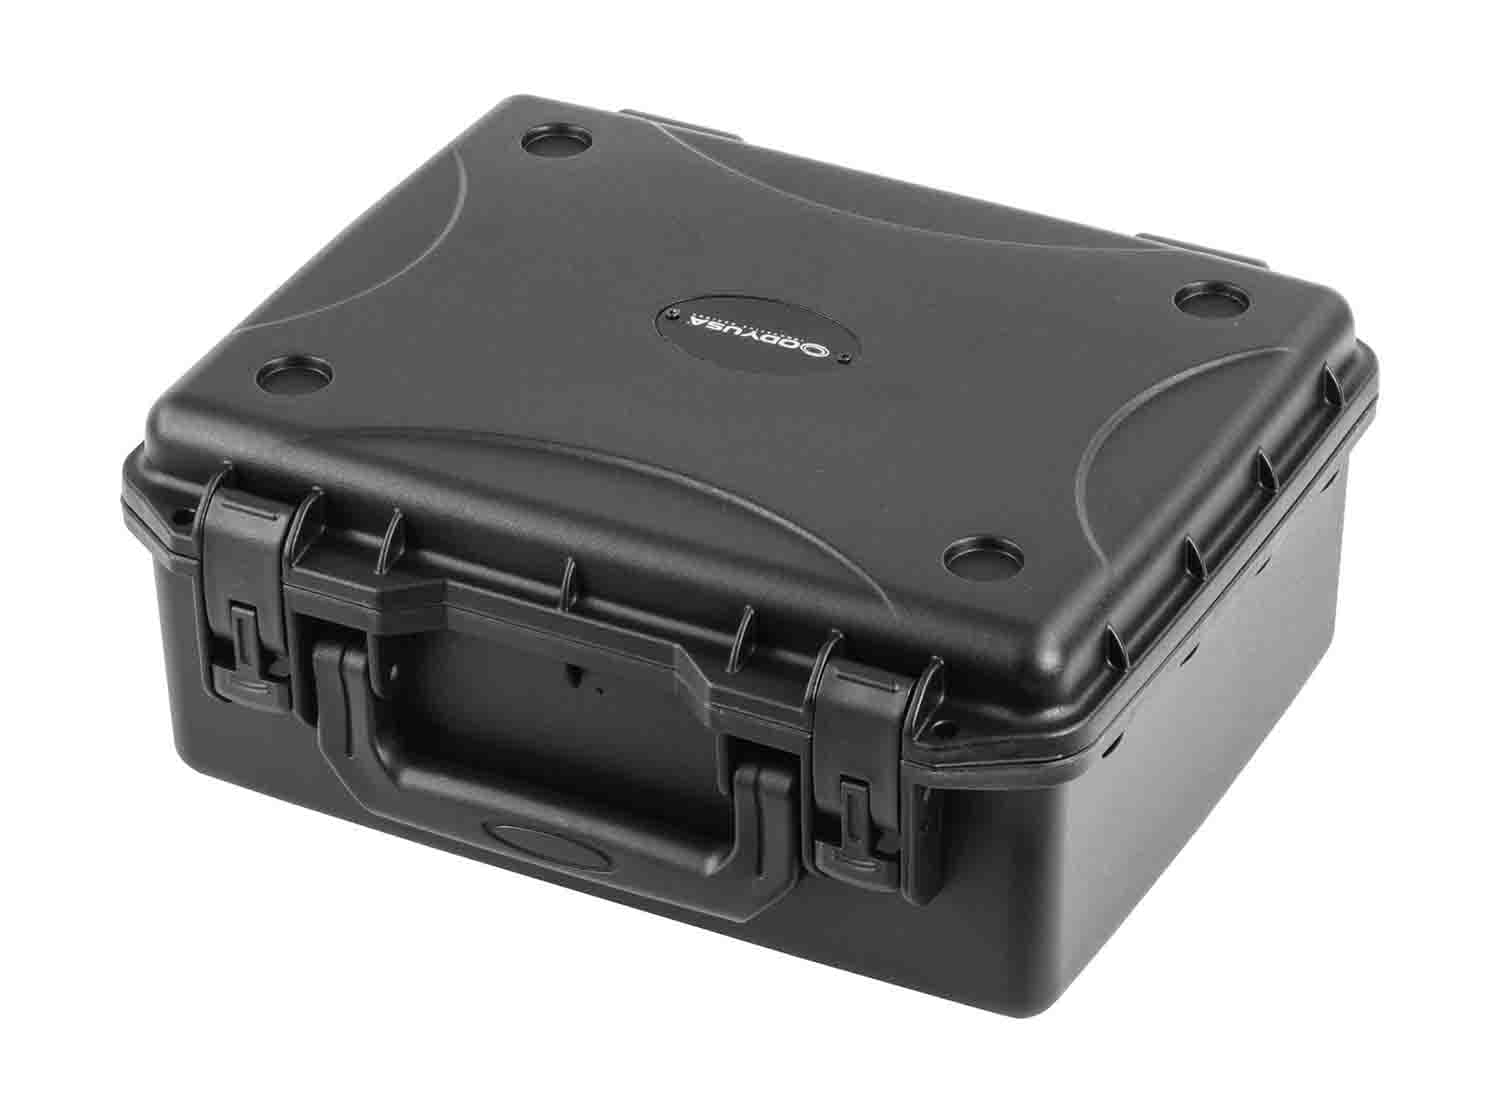 Odyssey VU110804 Vulcan Injection-Molded Utility Case with Pluck Foam - 11 x 8.5 x 3.75" Interior - Hollywood DJ